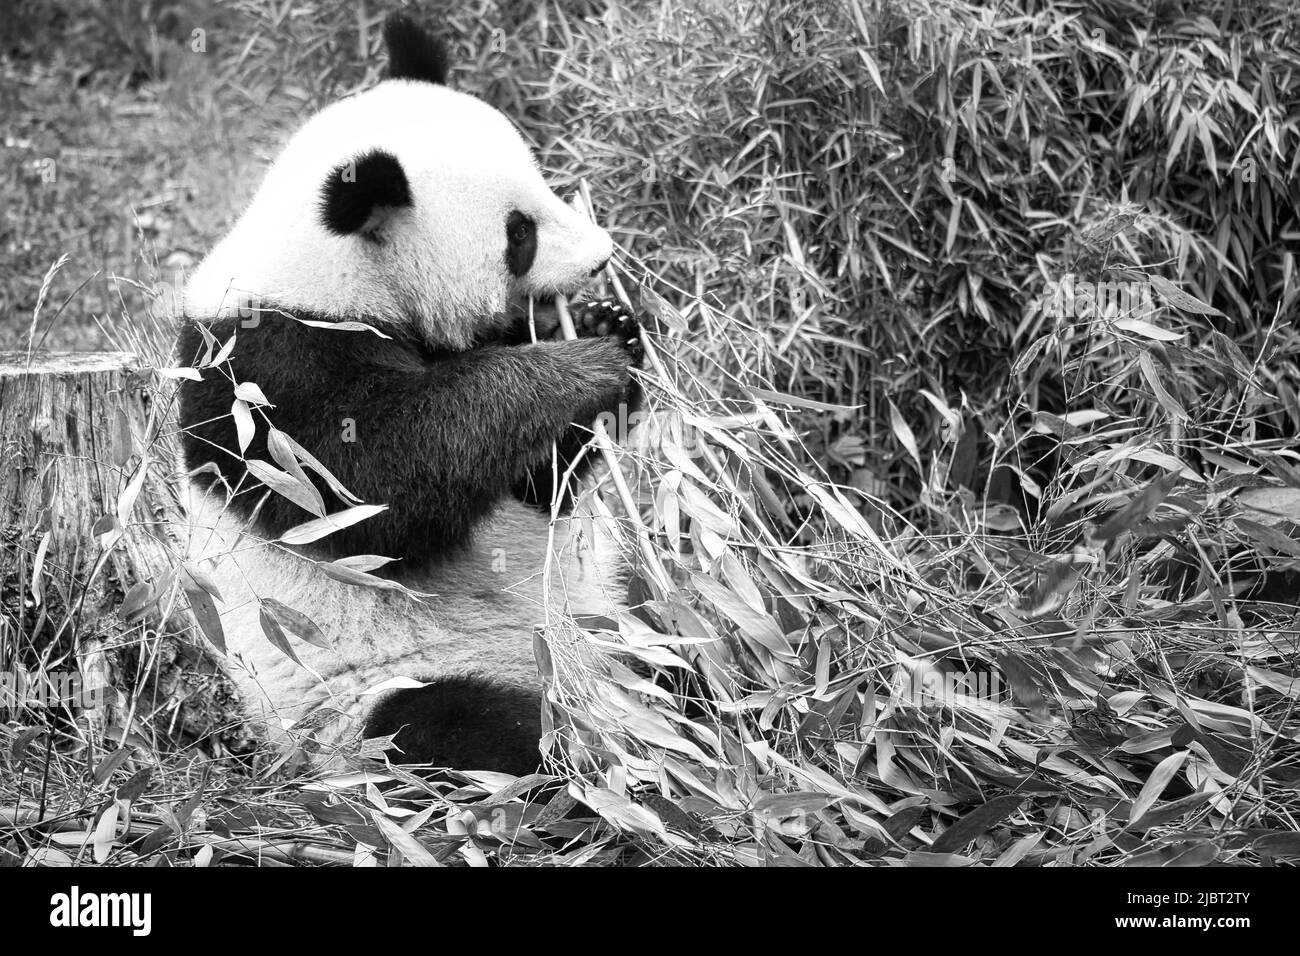 big panda in black and white, sitting eating bamboo. Endangered species. Black and white mammal that looks like a teddy bear. Deep photo of a rare bea Stock Photo